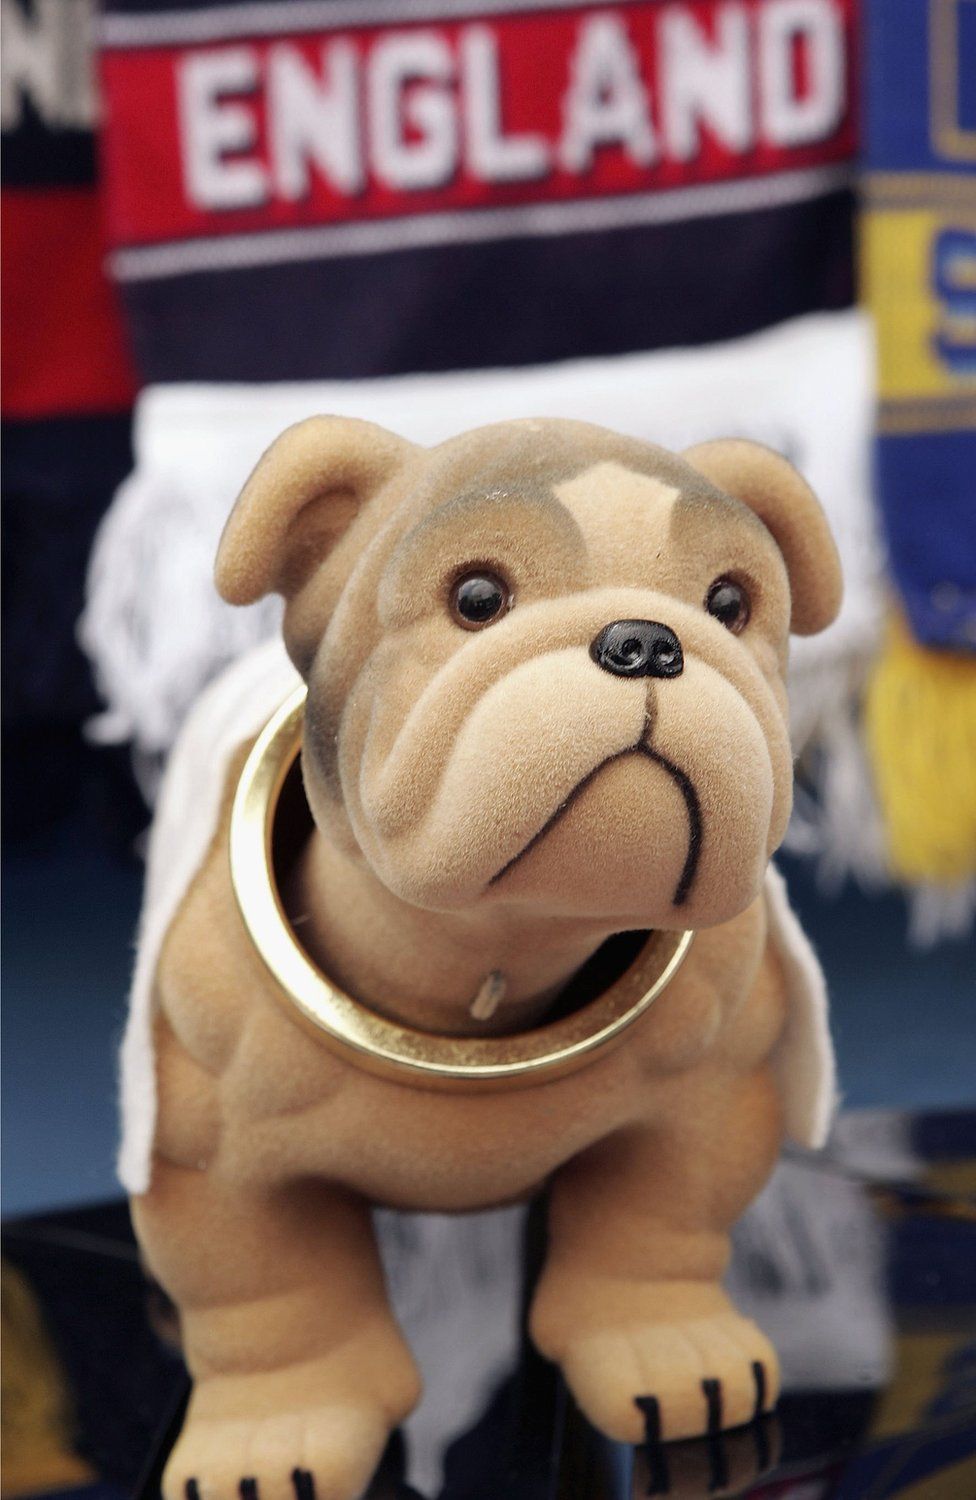 British bulldog ownership has doubled but breed faces high risk of